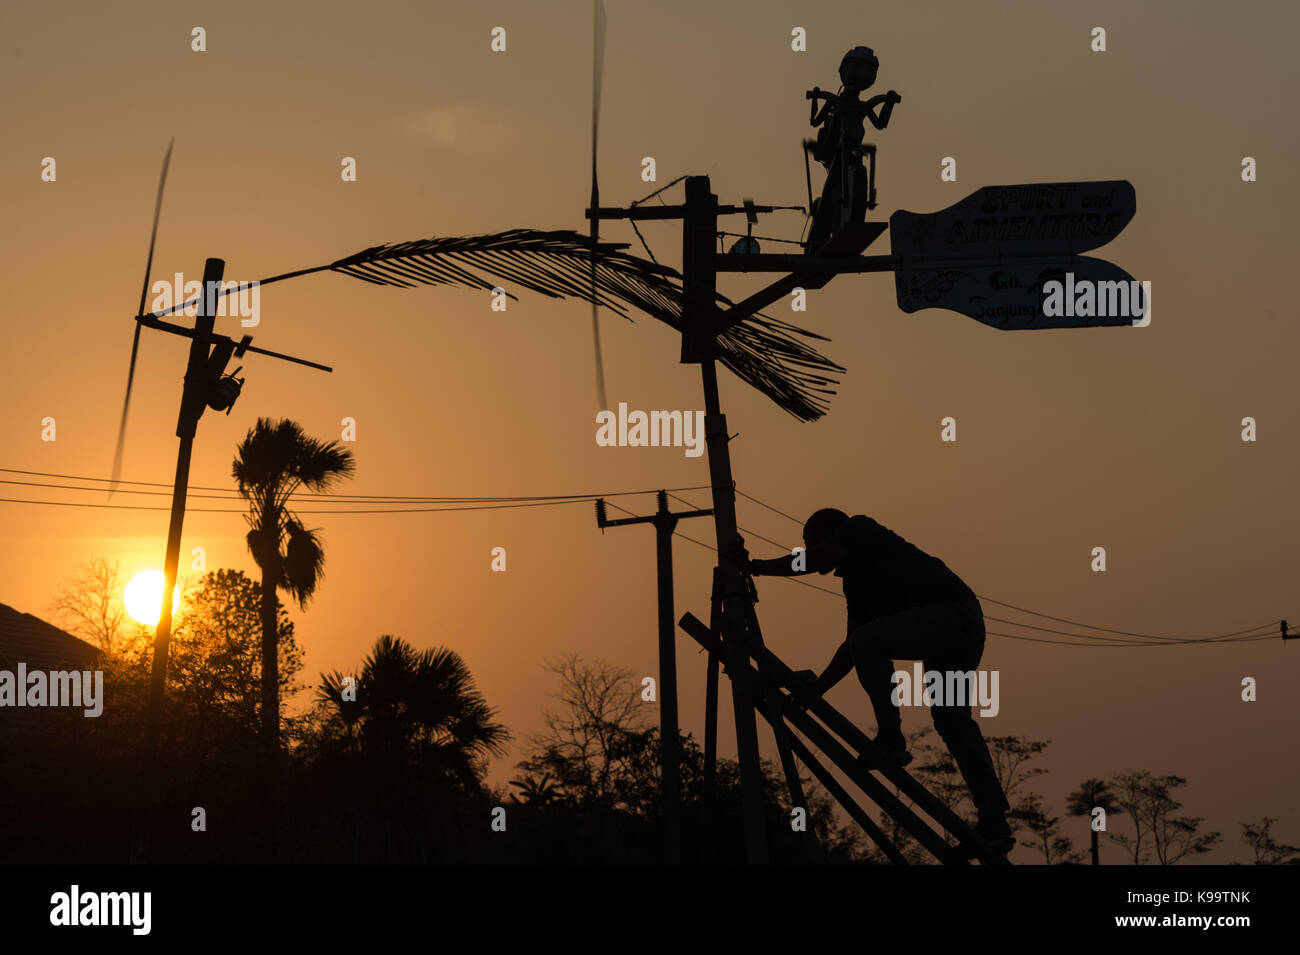 Pandeglang, Indonesia. 22nd Sep, 2017. A man climbs stairs to repair his windmill during traditional windmill festival at Tanjung Lesung, Pandeglang district, Banten Province in Indonesia, Sept. 22, 2017. Credit: Veri Sanovri) (zjy/Xinhua/Alamy Live News Stock Photo